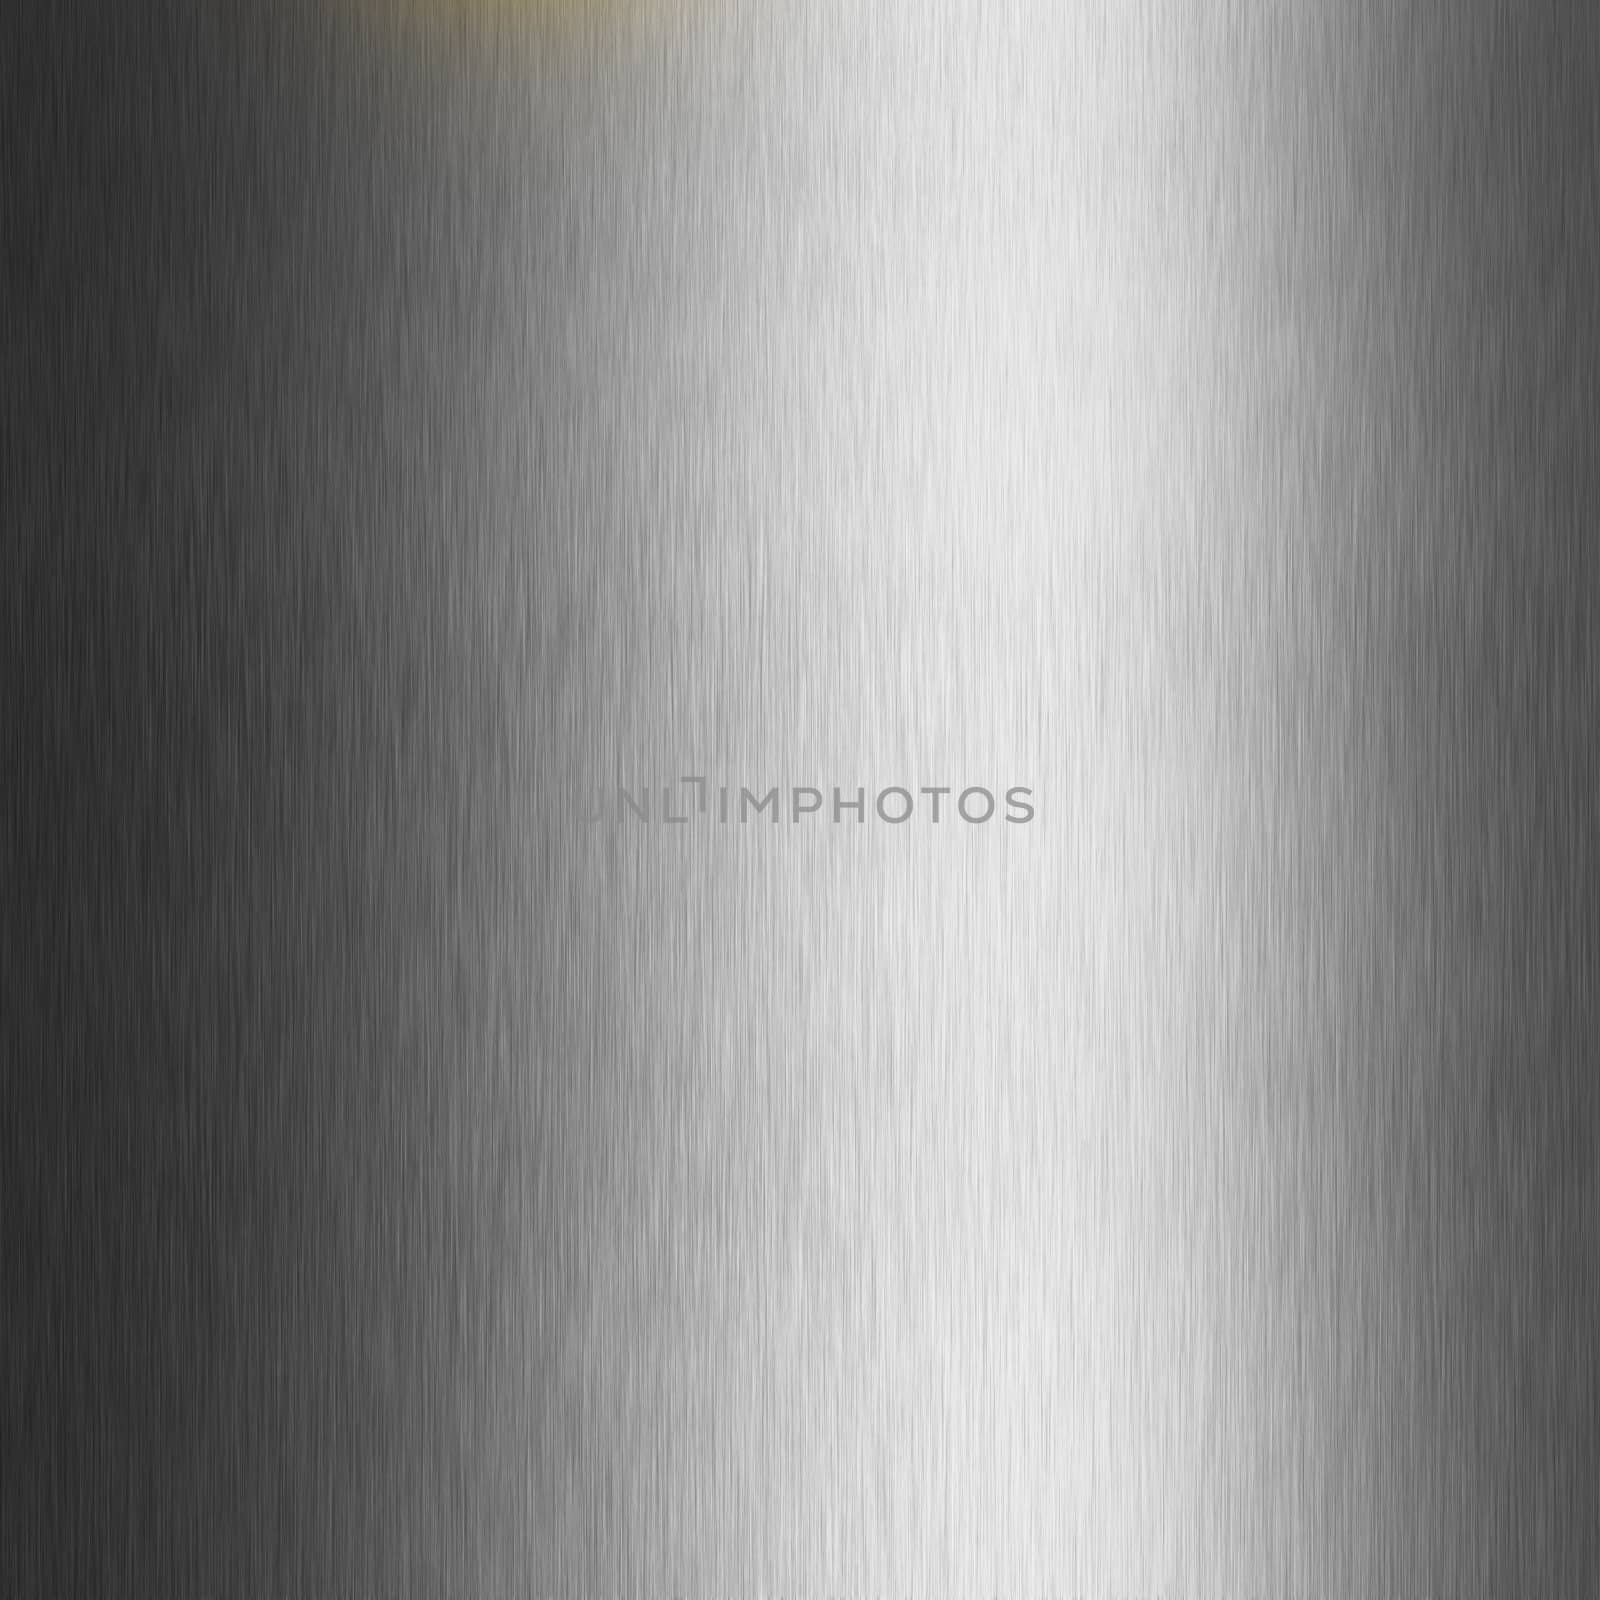 high quality Brushed metal texture abstract background. great for textures and overlays or even backgrounds.